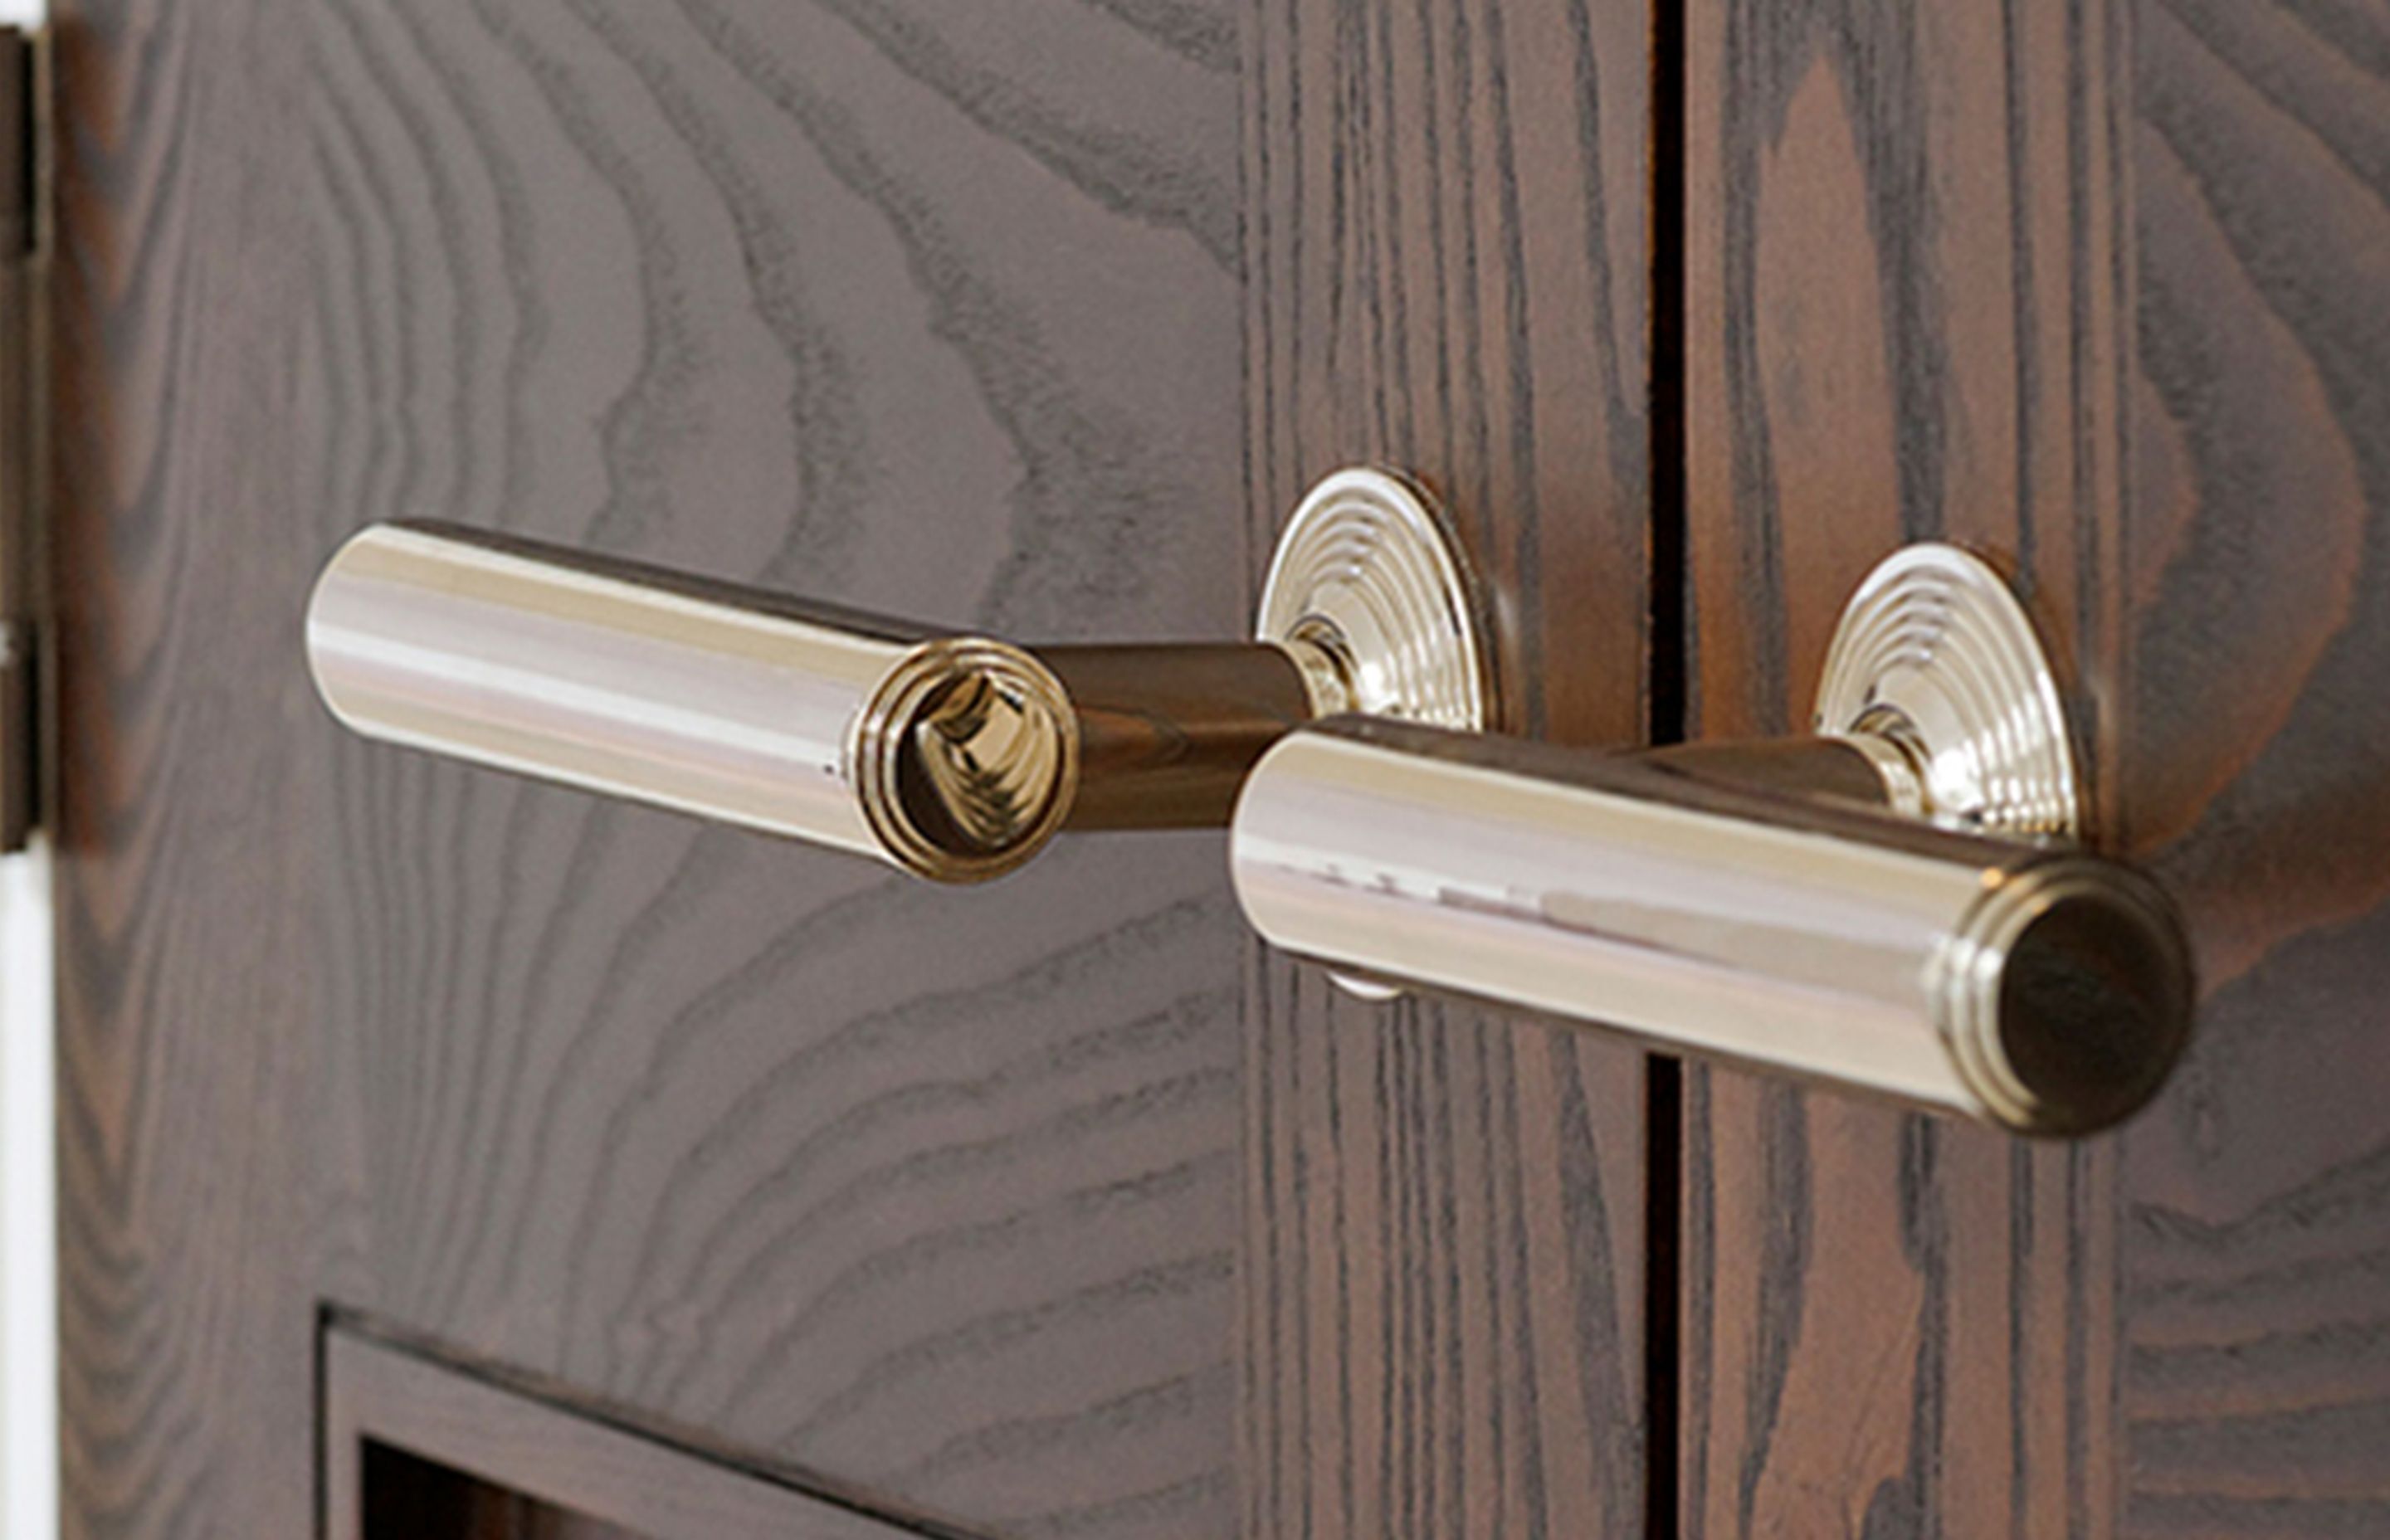 As well as the attention paid to the designs, Joseph Giles also produces quality internal workings, with appropriately weighted springs engineered for lever handles and knobs—both designed to last the lifetime of the handle.